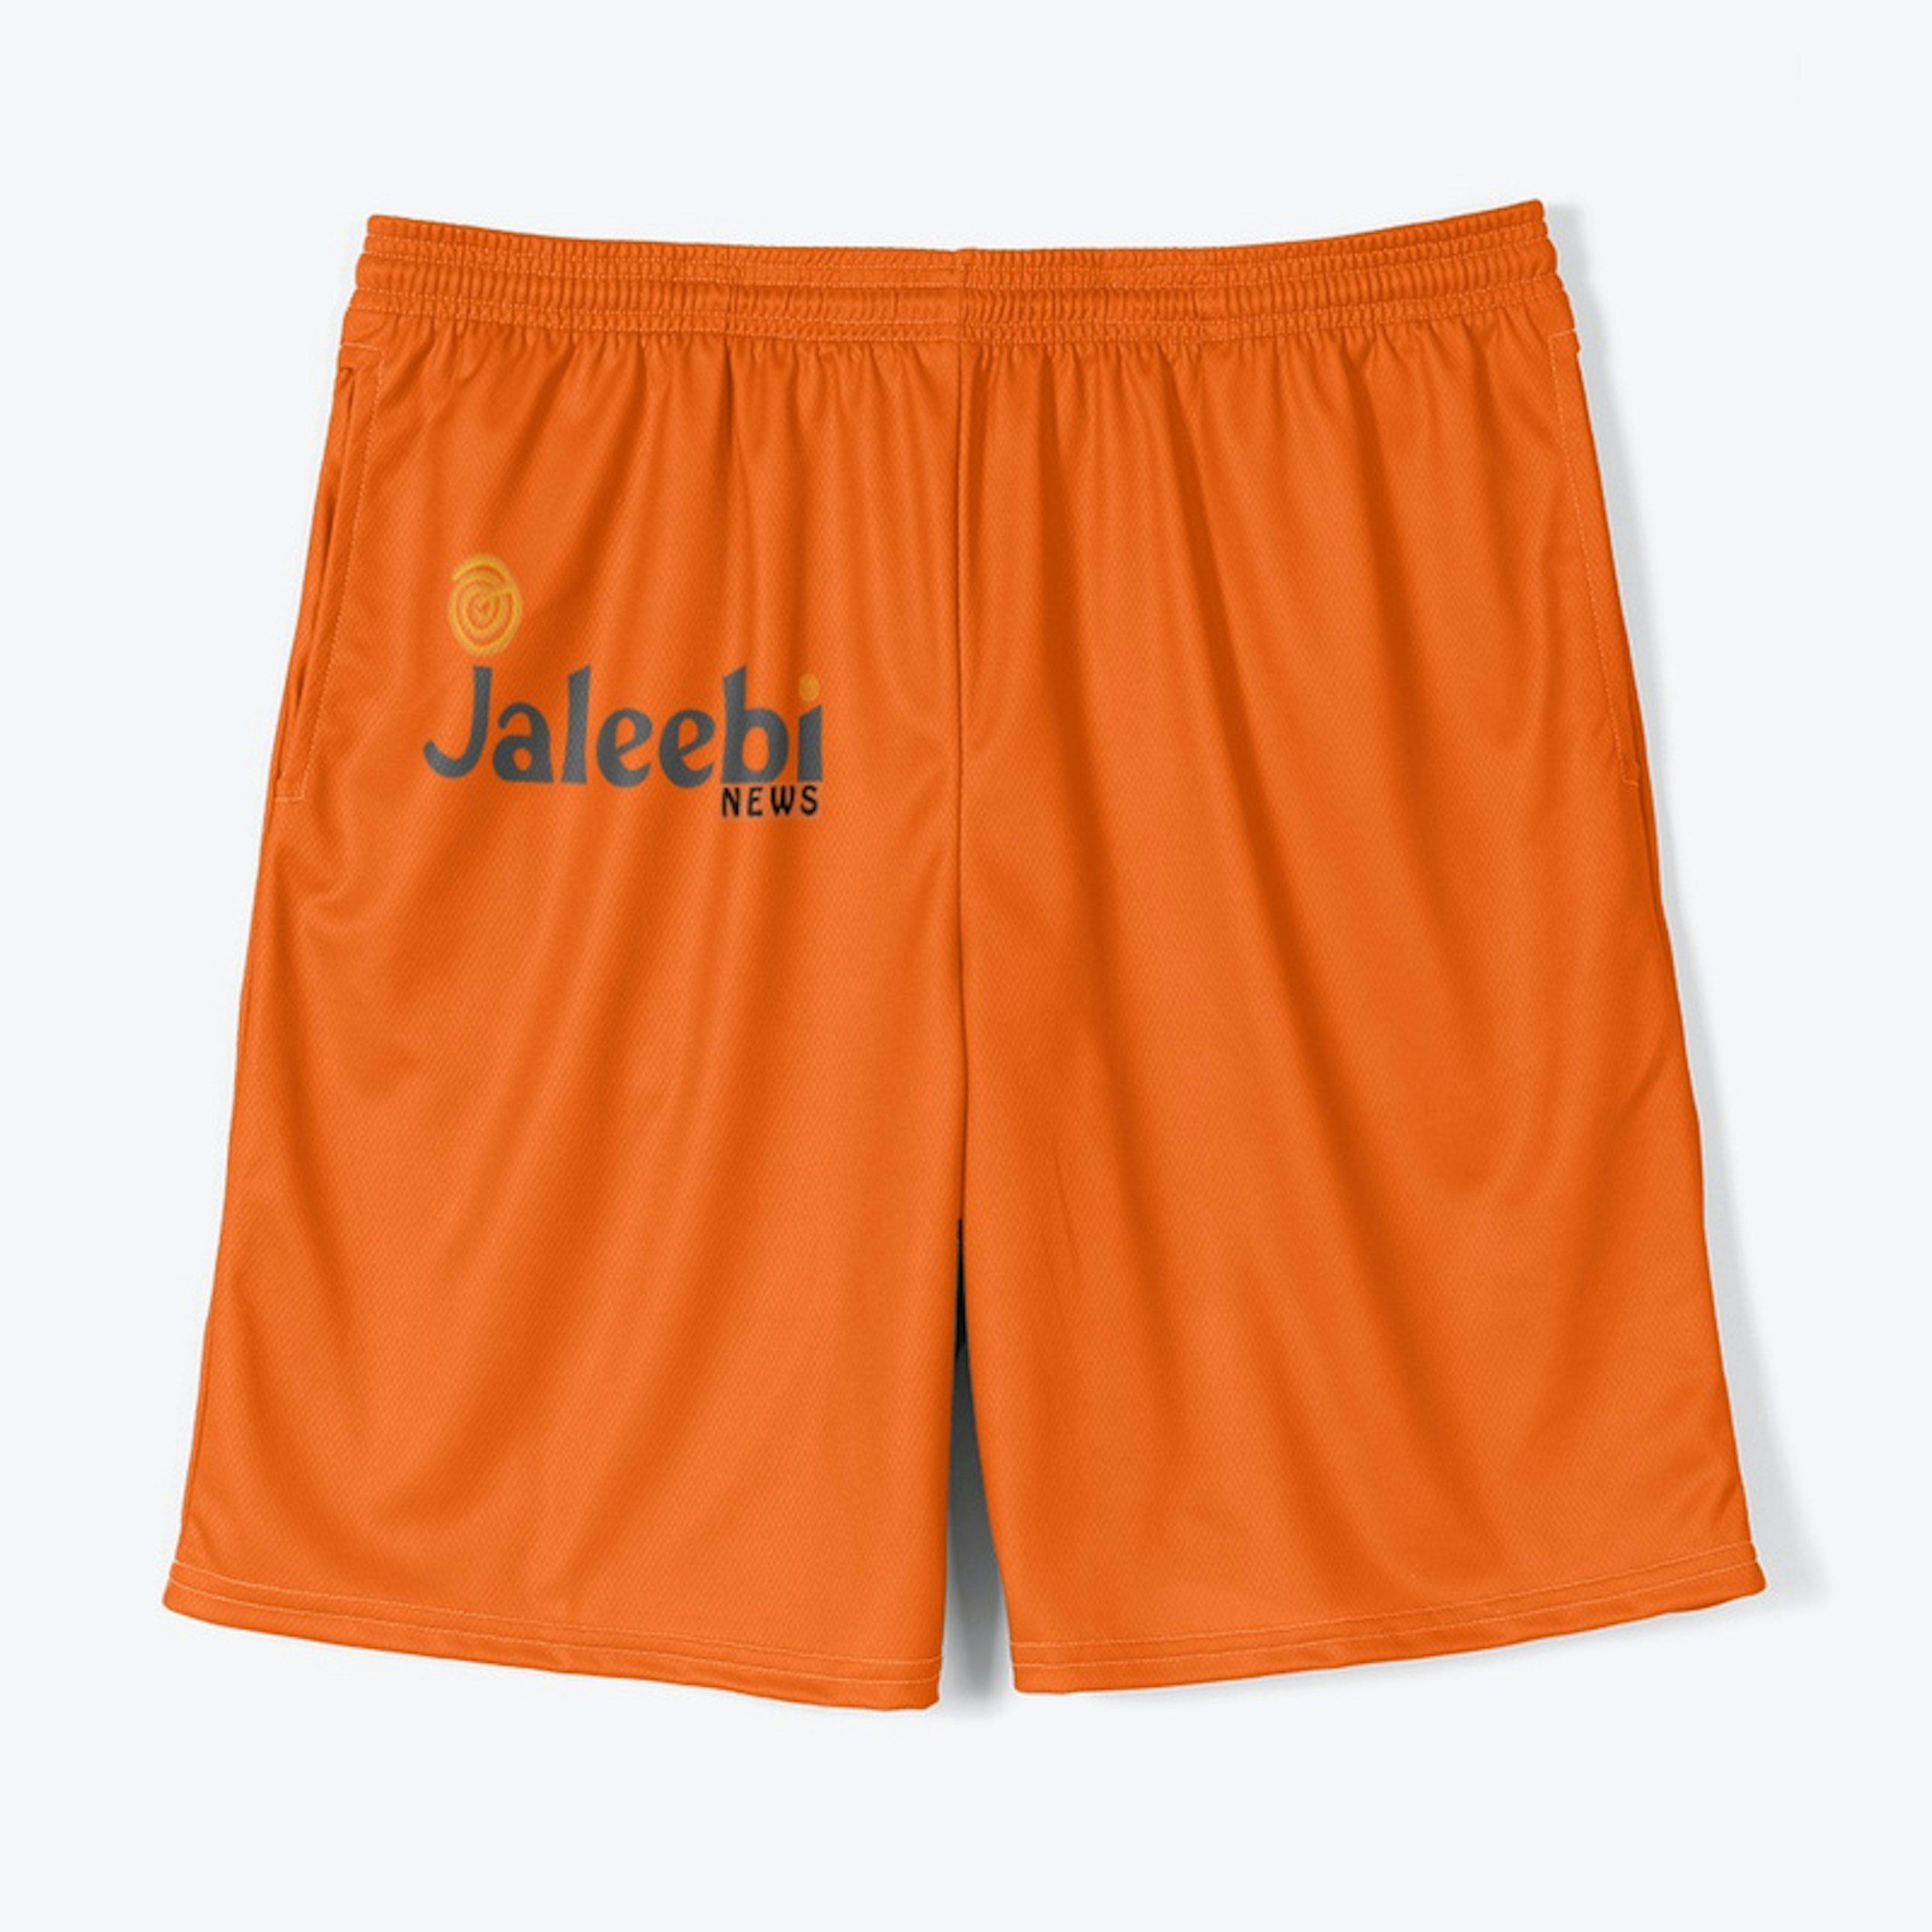 All-Over Print Men's Jersey Shorts